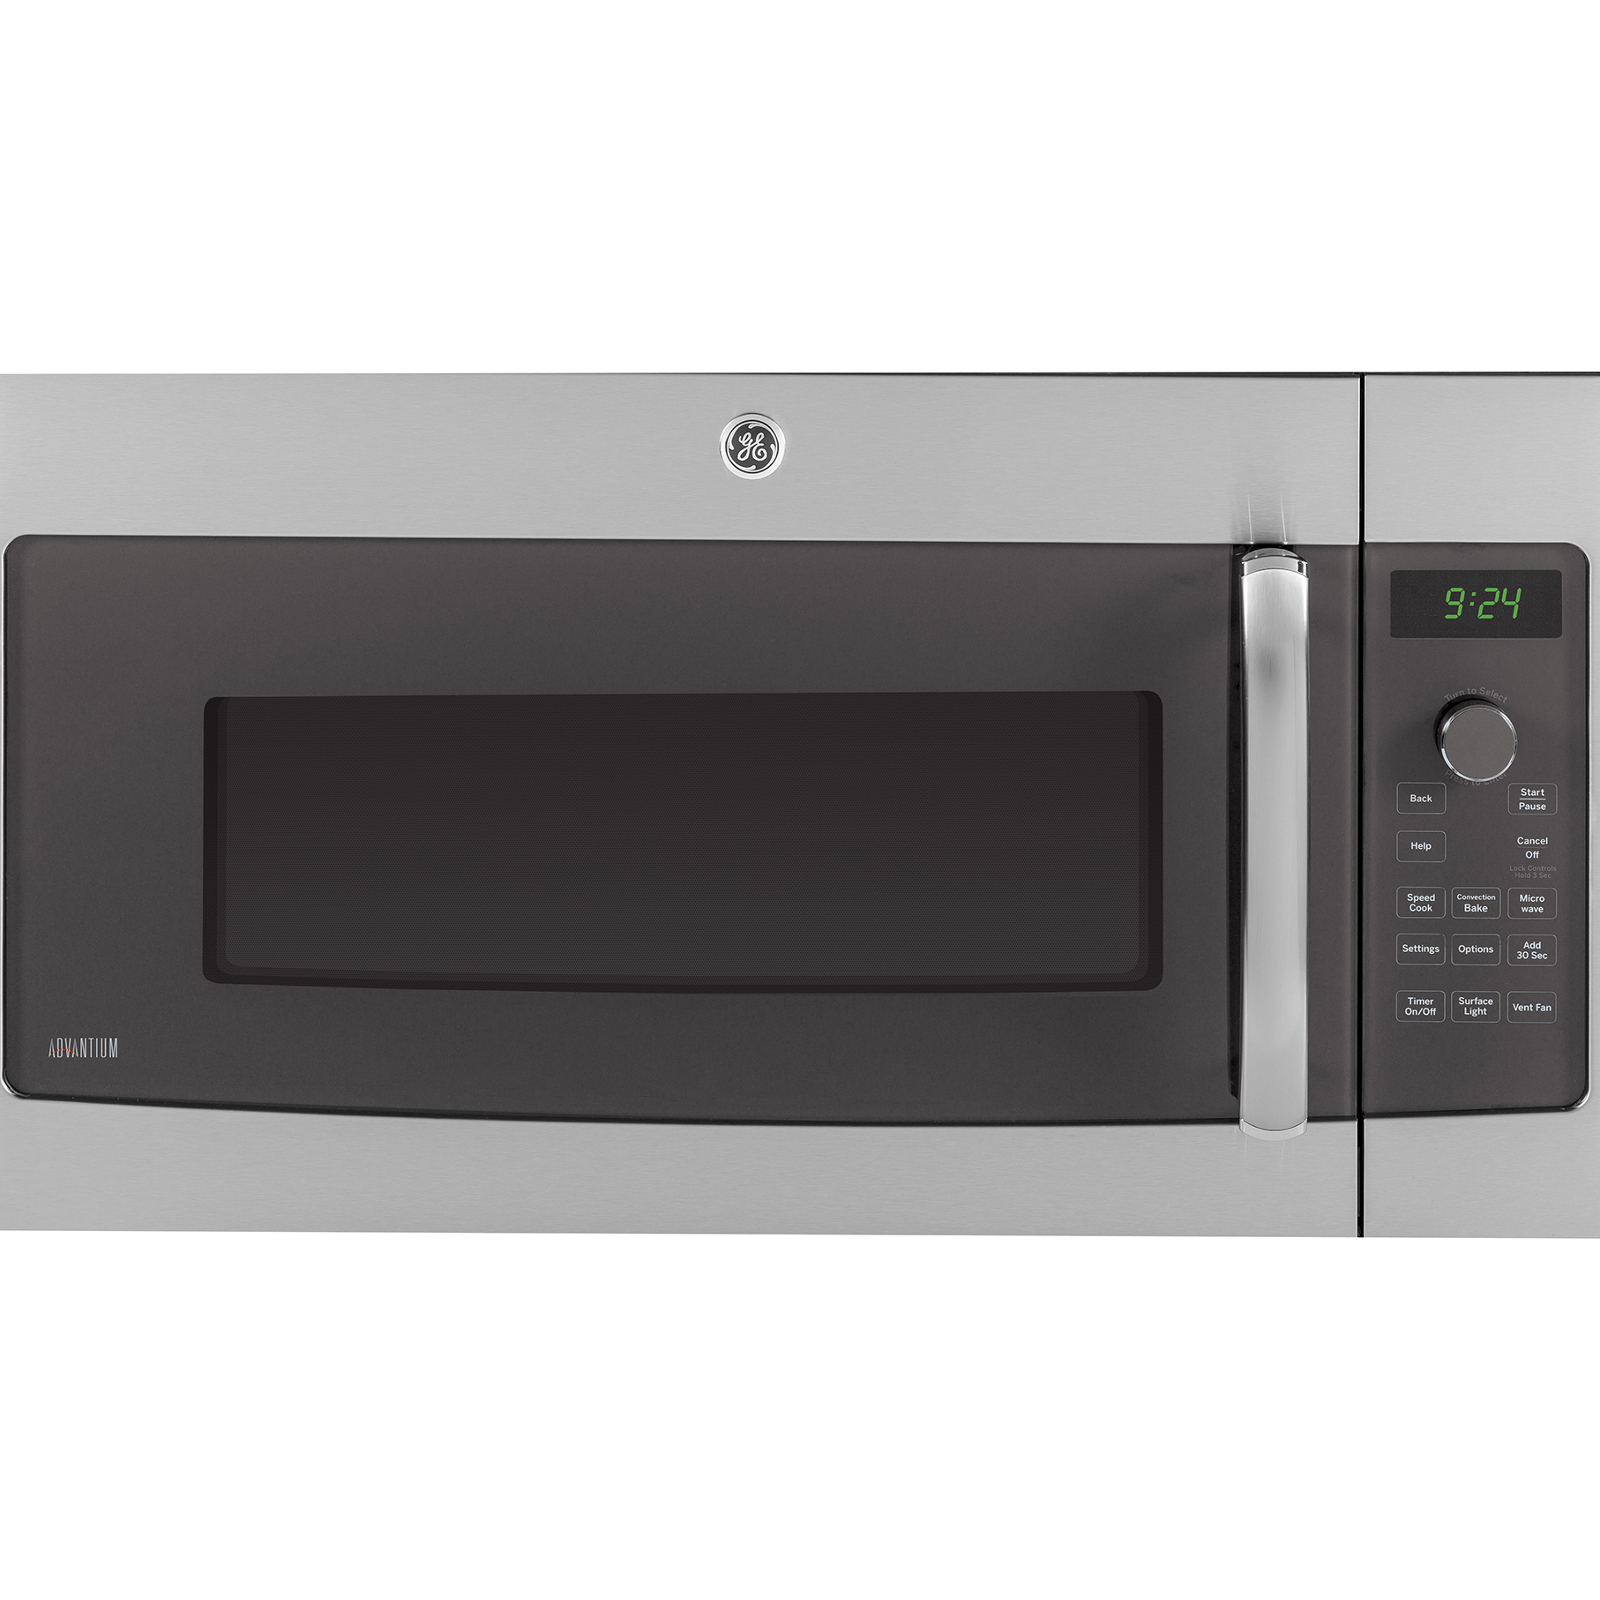 Small Over The Range Microwave Dimensions digloadsoft